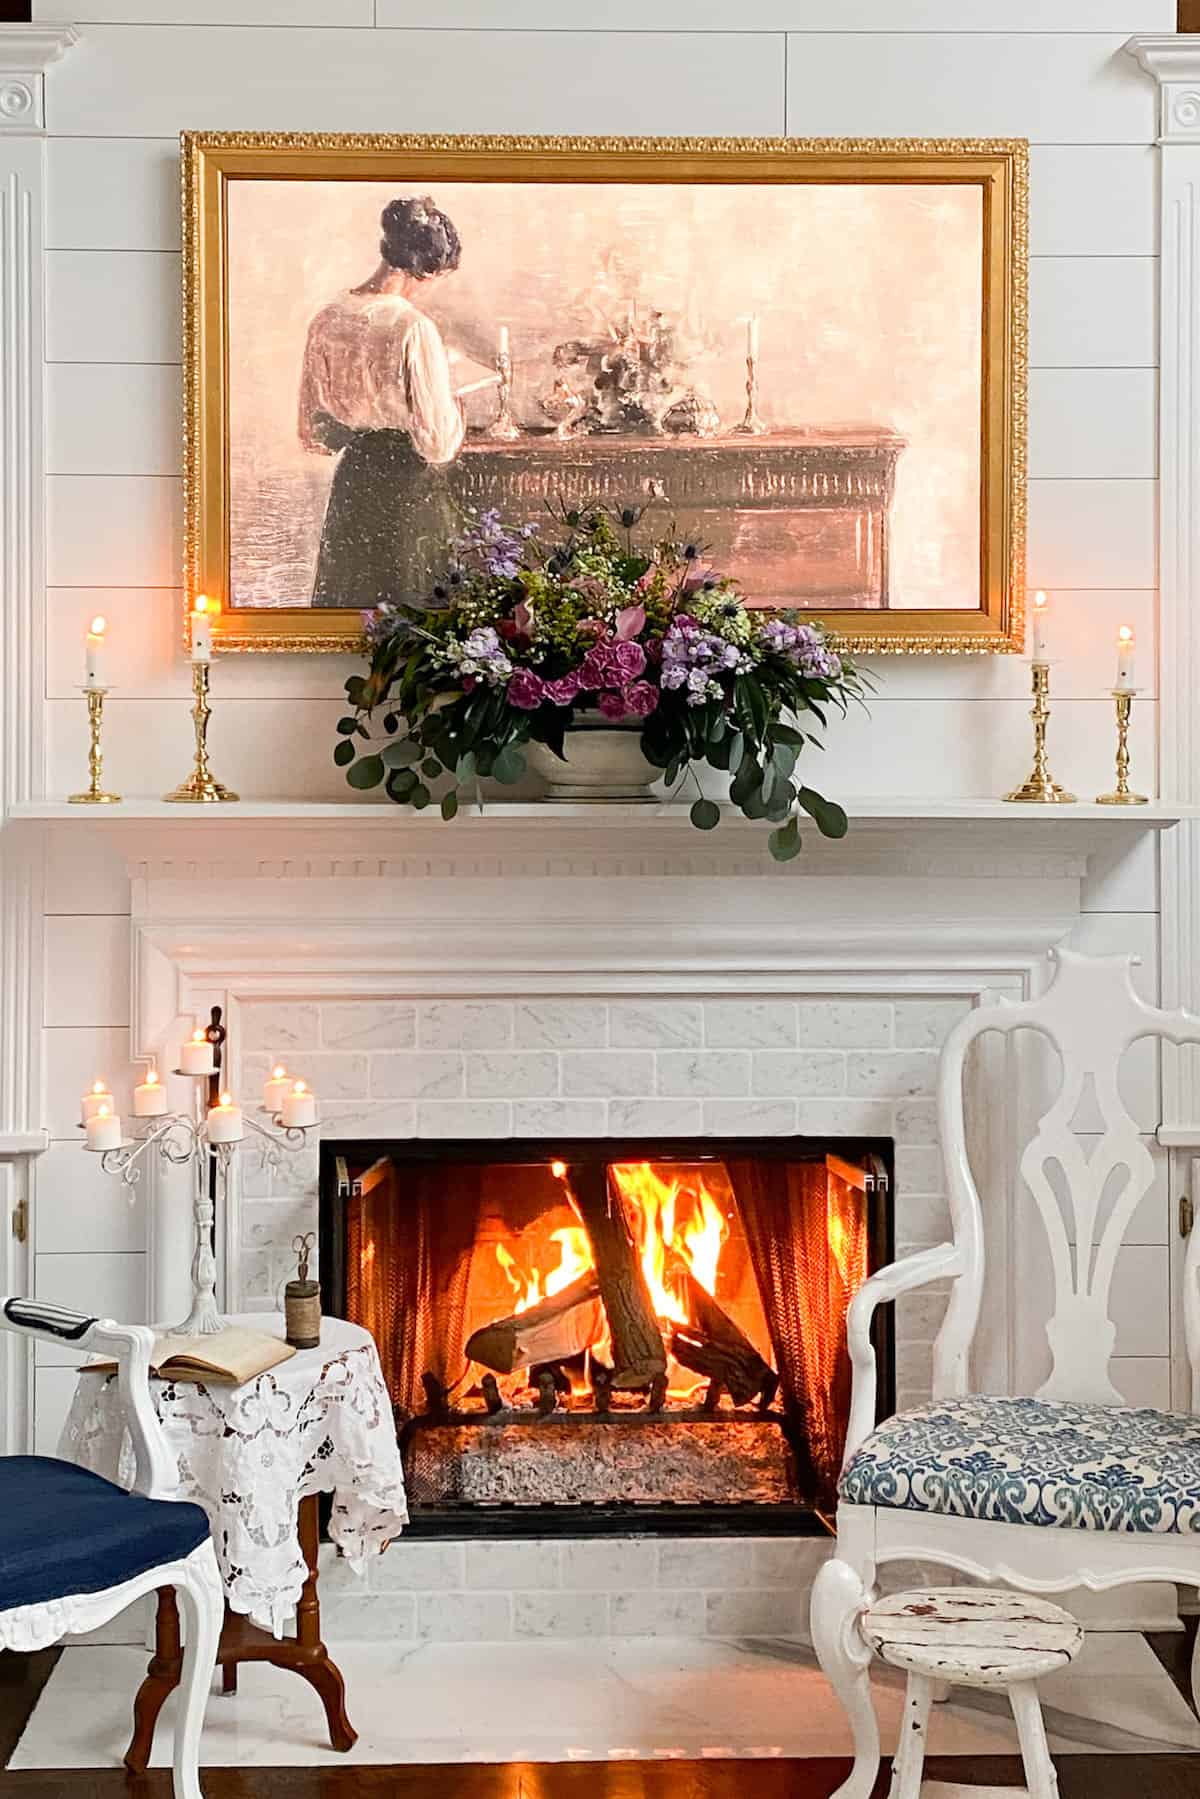 beautiful fireplace picture. fire is lit. there is a large floral arrangement on the mantel flanked by candles. the frame tv with a vintage photo on it.